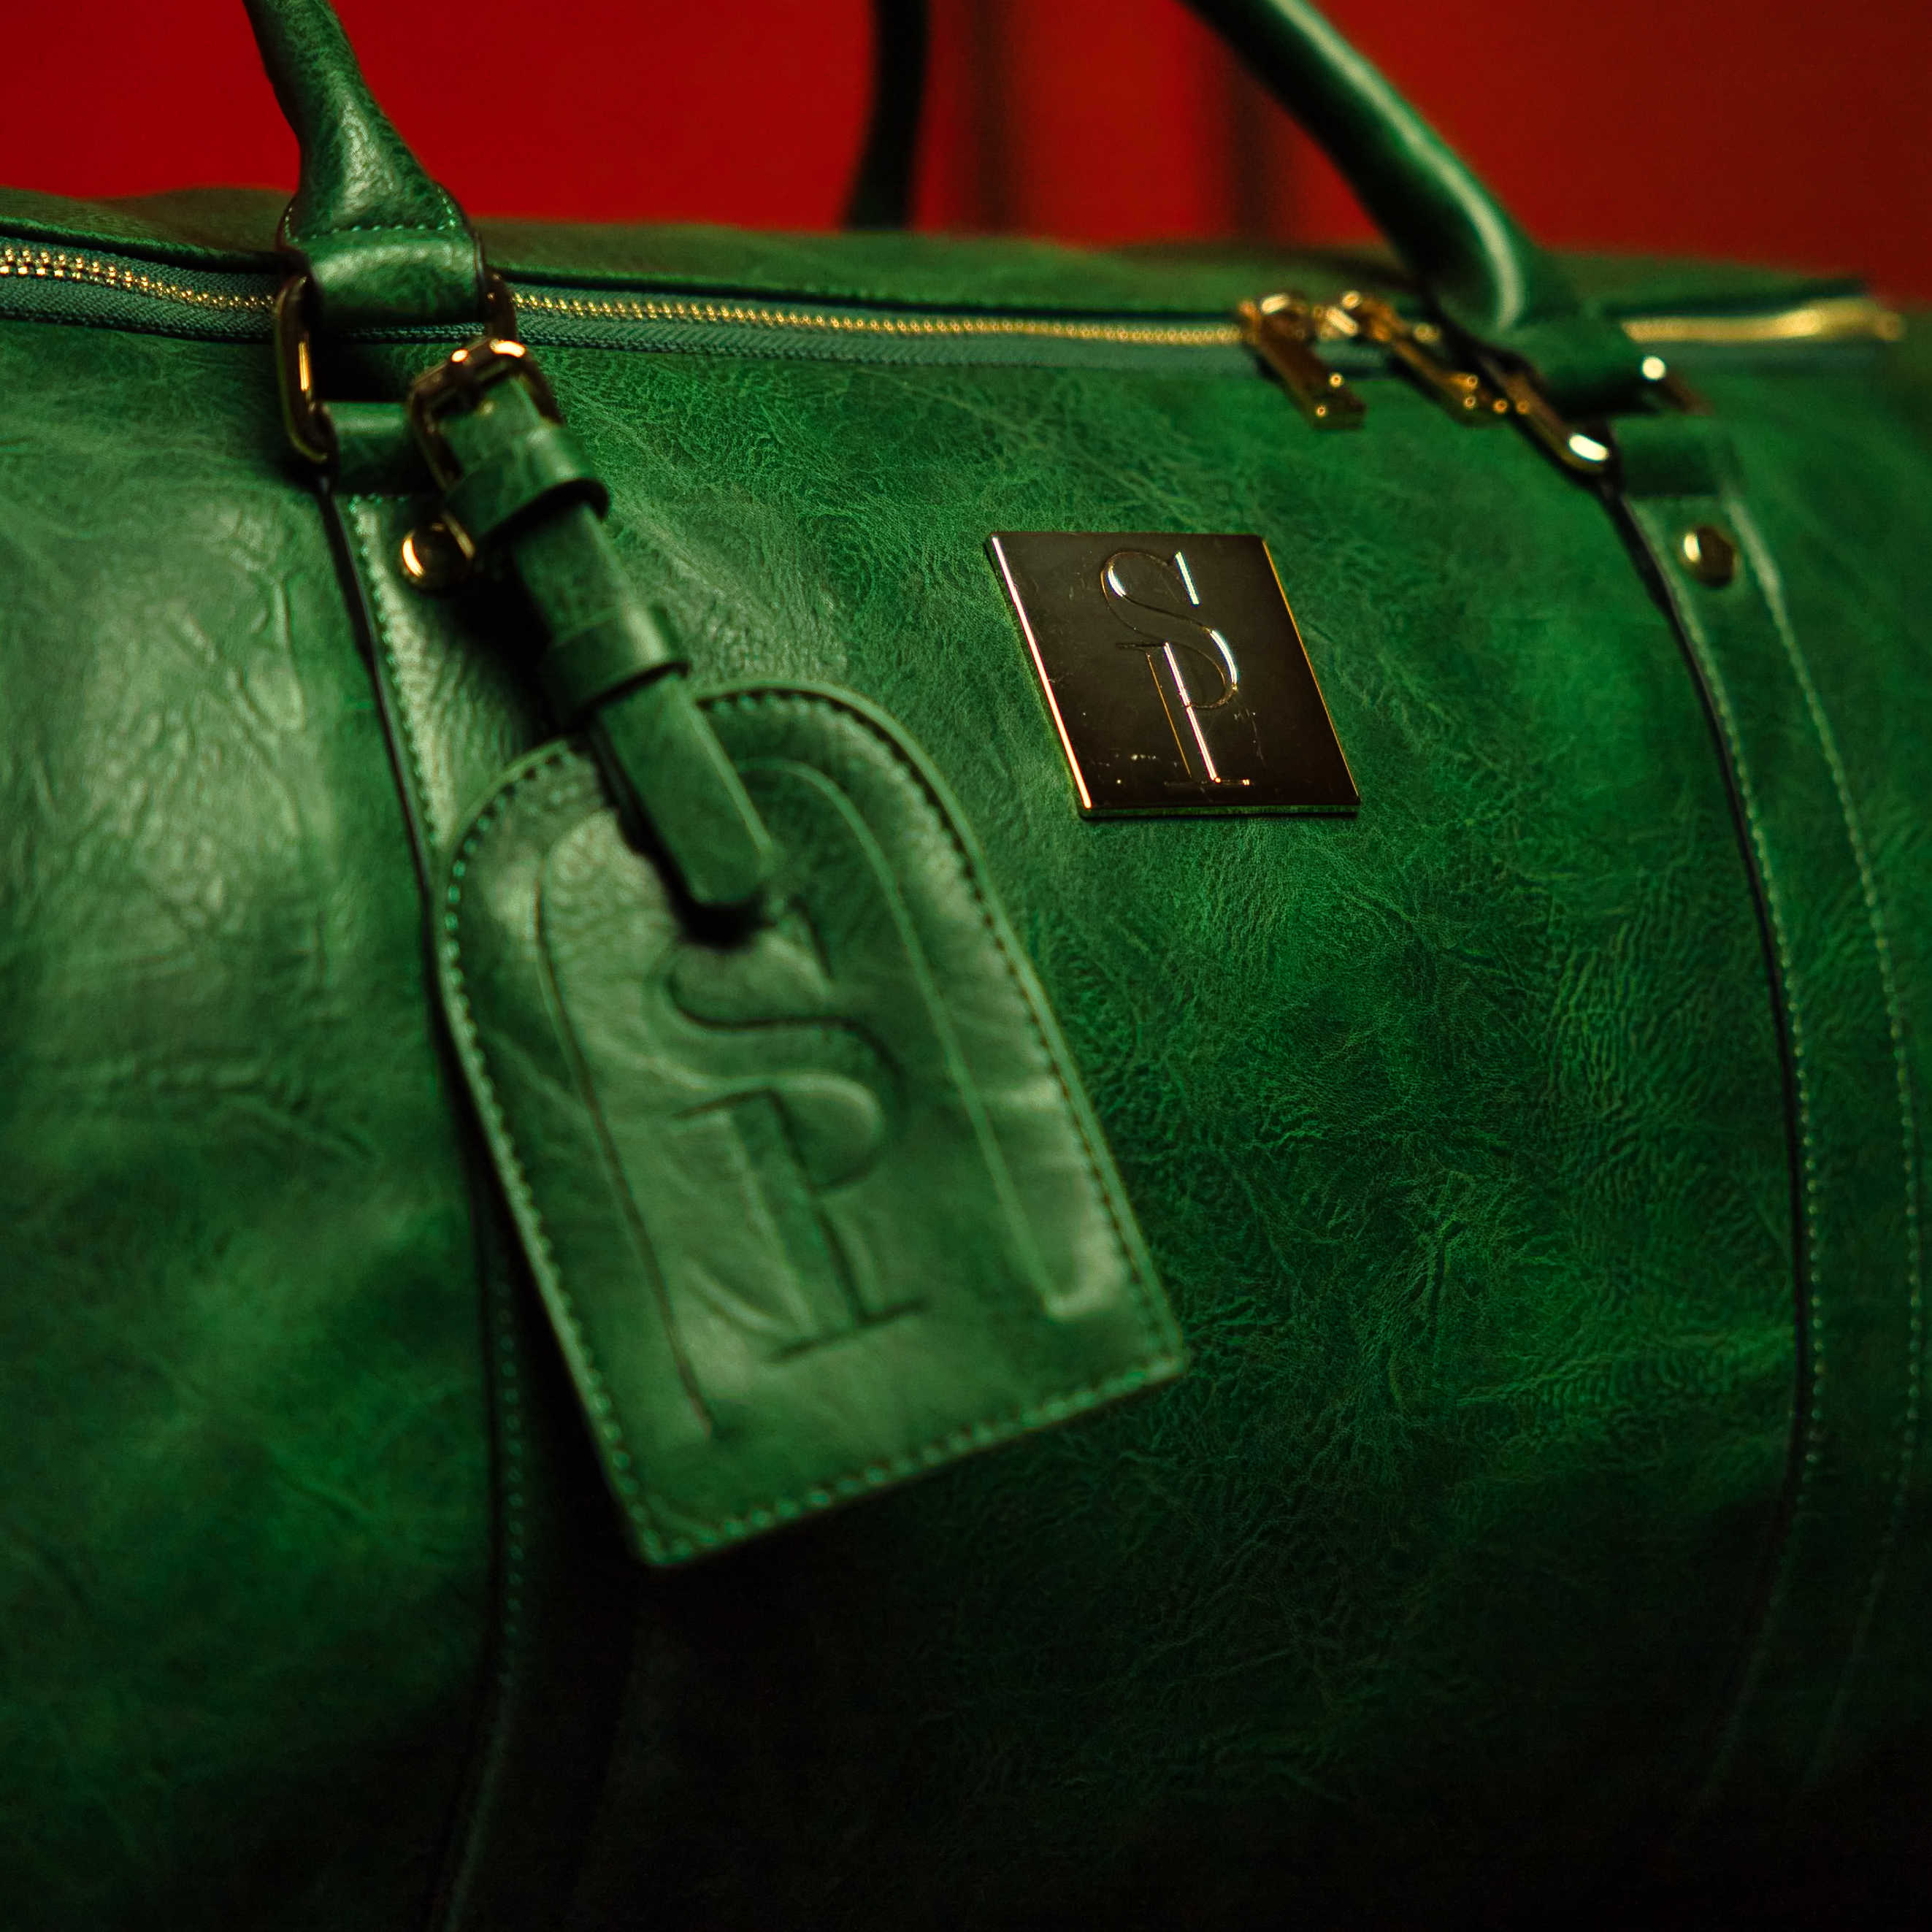 Emerald Green Luciano Leather Duffle Bag (New Weekender Design) - Sole Premise